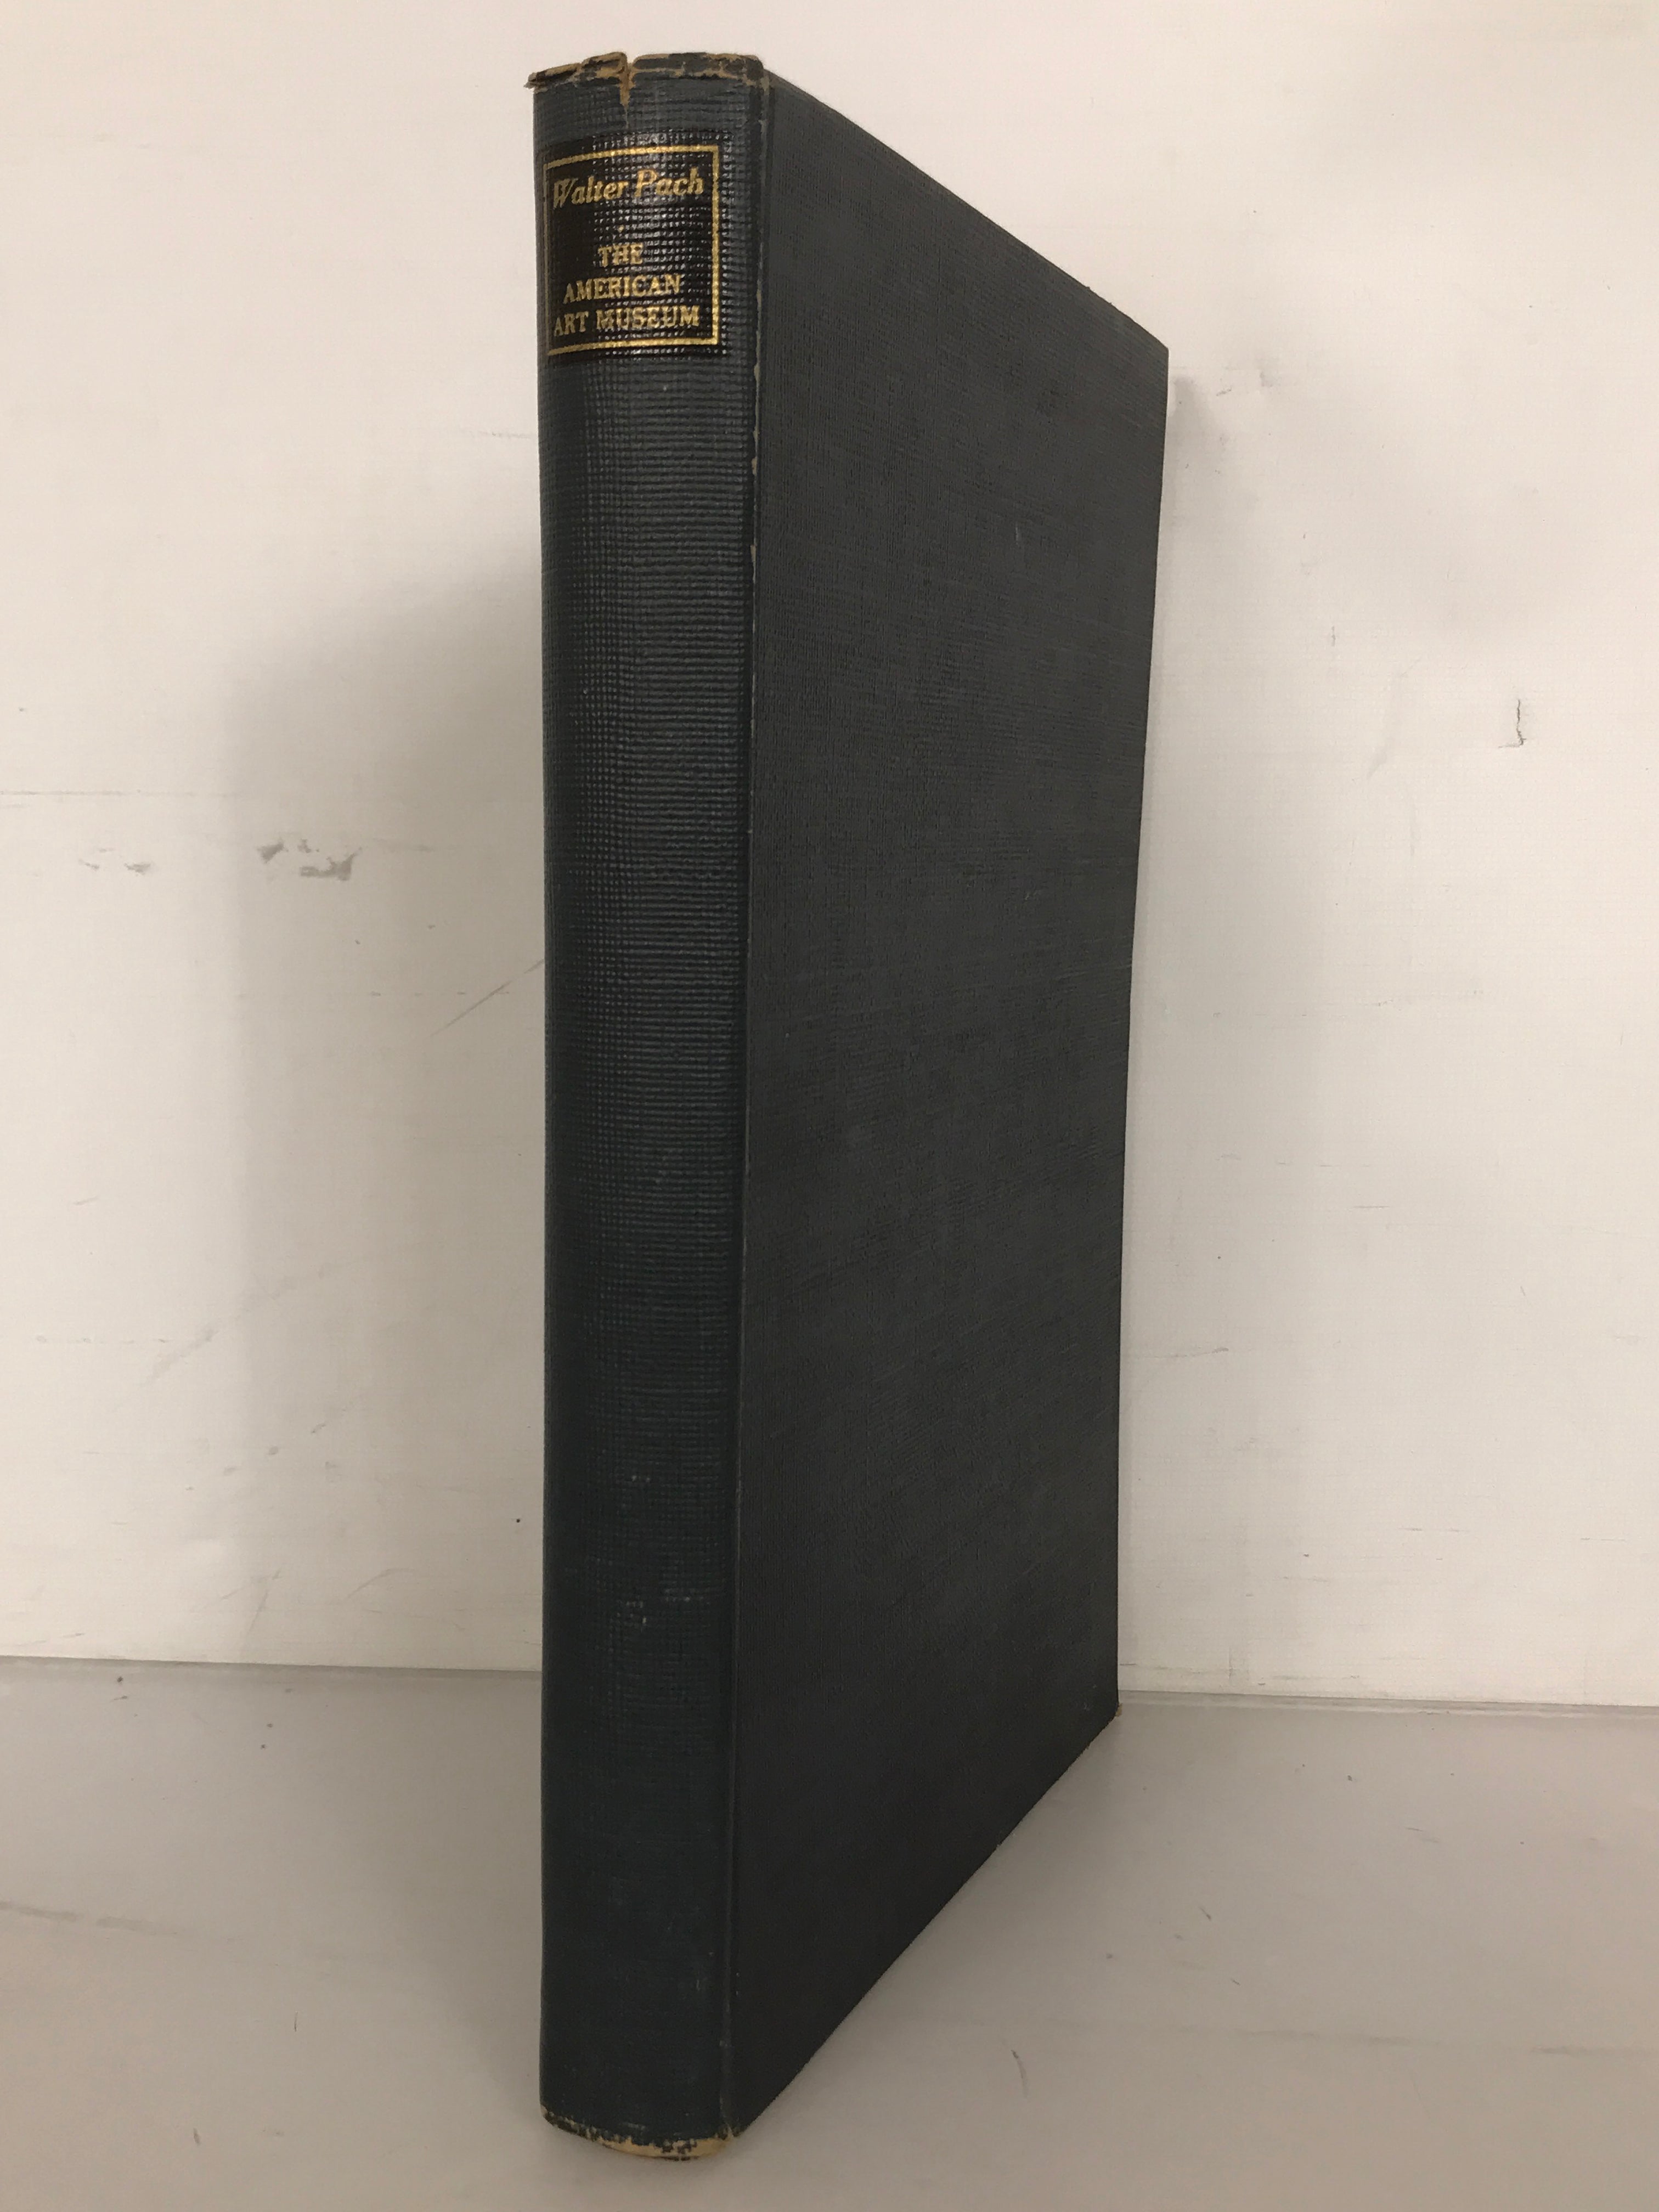 The Art Museum in America by Walter Pach 1948 HC